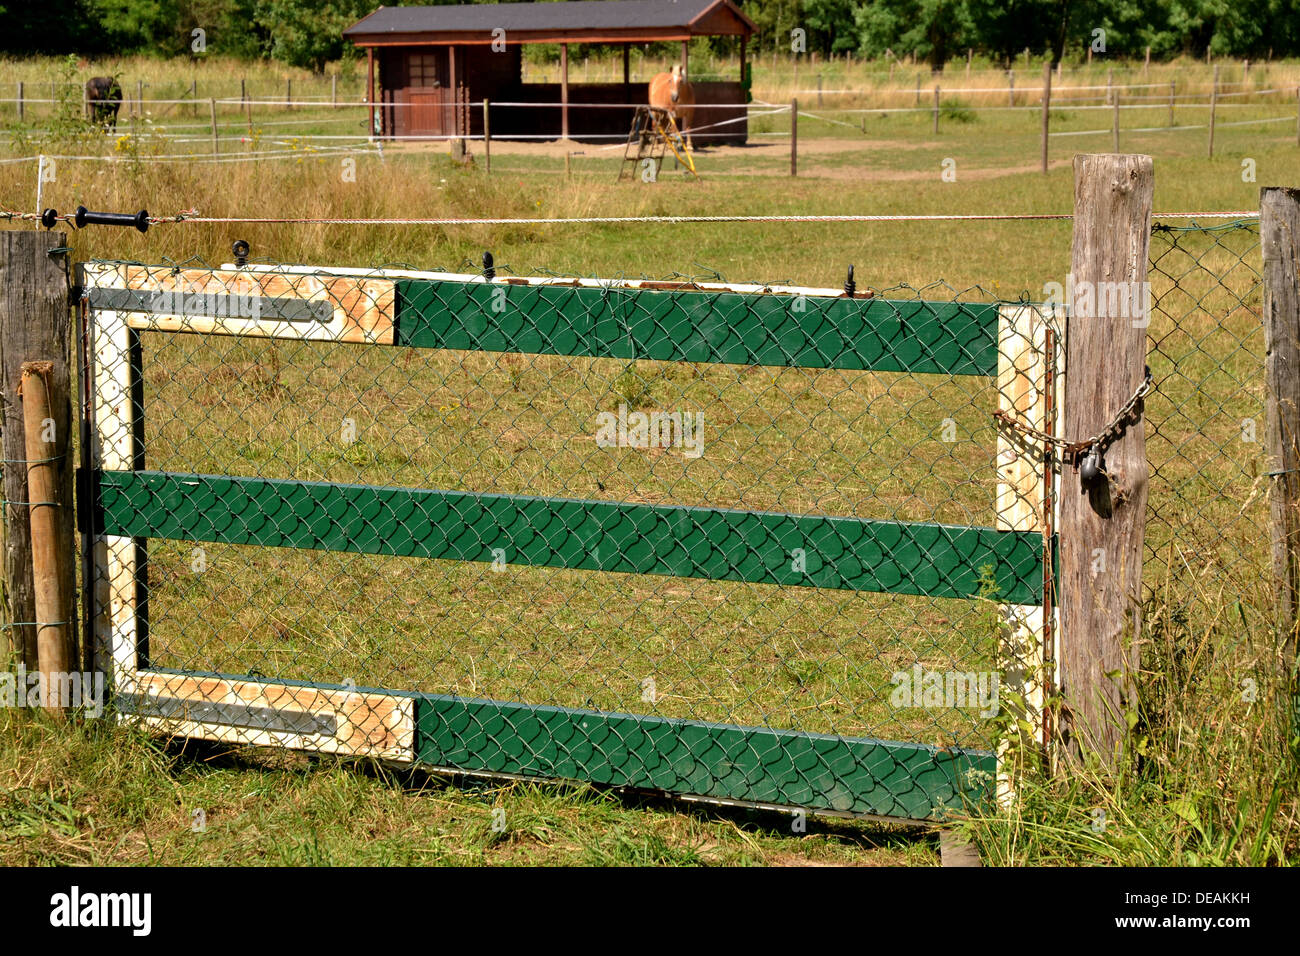 Pasture with wire and wood fence painted white and green. Photo taken in Heerlen in the province of Limburg in the Netherlands Stock Photo